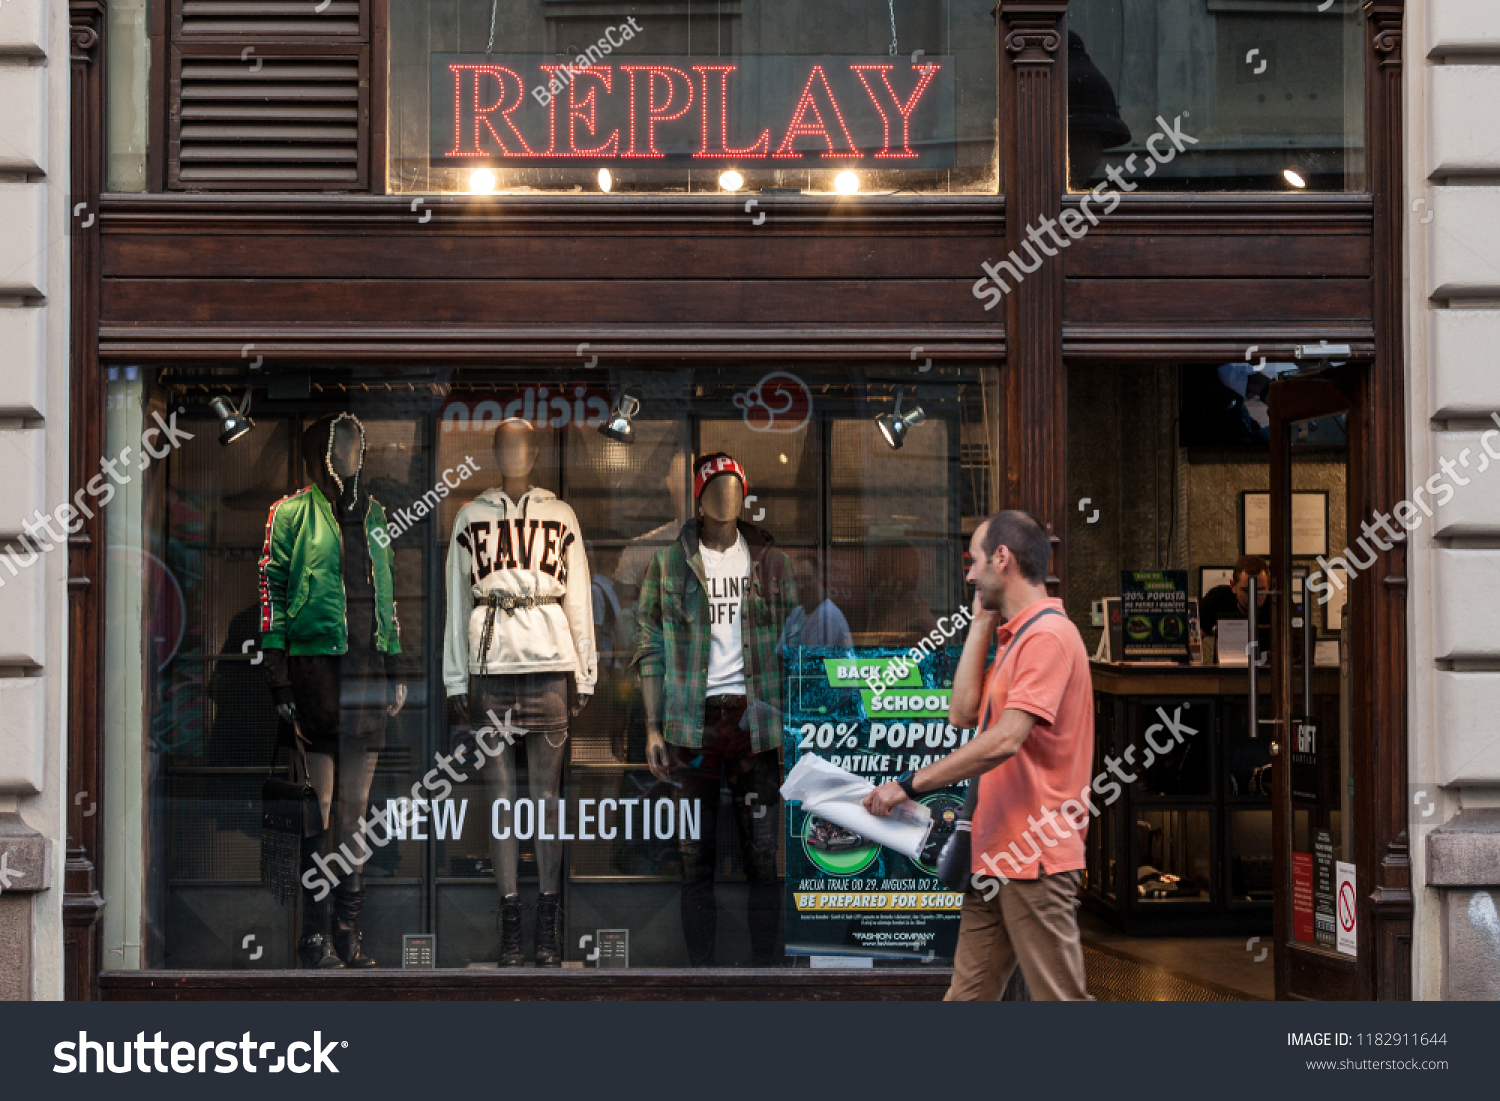 replay jeans company